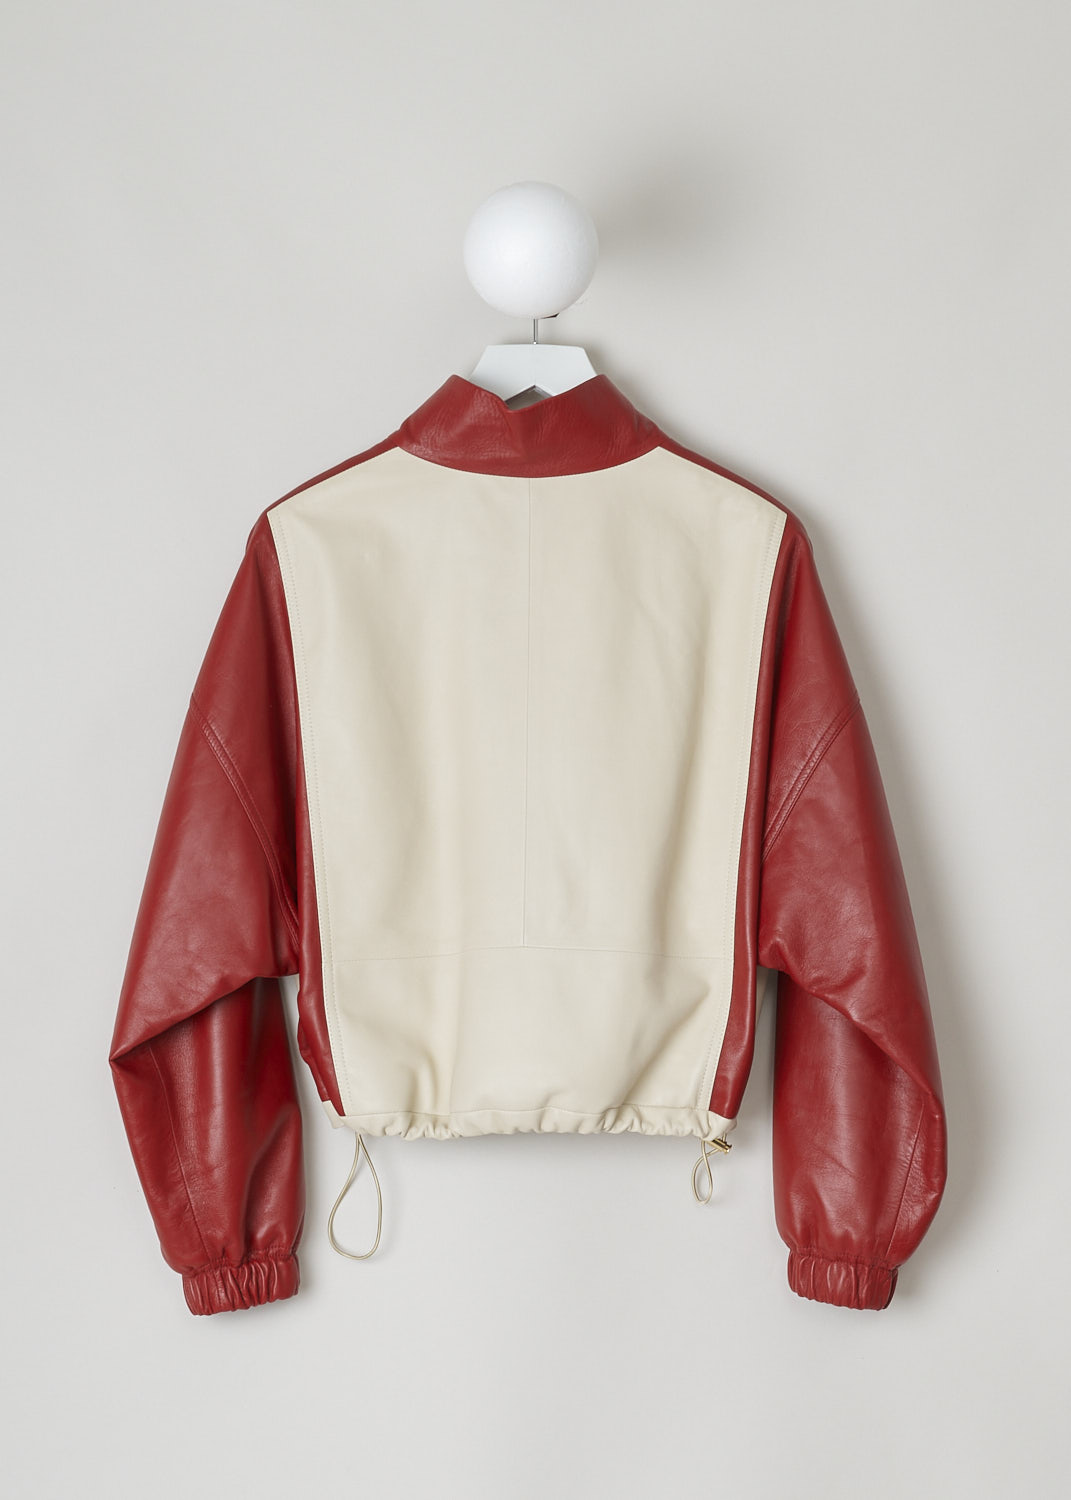 CELINE, TWO-TONE CROPPED LEATHER JACKET, 150T_2EE13_27LV, Red, Beige, Back, This cropped leather jacket is  two-toned, with the top half in lipstick red and the bottom half and the back in off-white. The jacket has a stand-up collar, two patch pockets with flap and a zipper in a matching off-white color. The gold-tone pull-tab is shaped in the brand's logo. The long sleeves have elasticated cuffs. The elasticated hemline has gold-tone cord locks on the inside. The jackets has a single inner pocket

